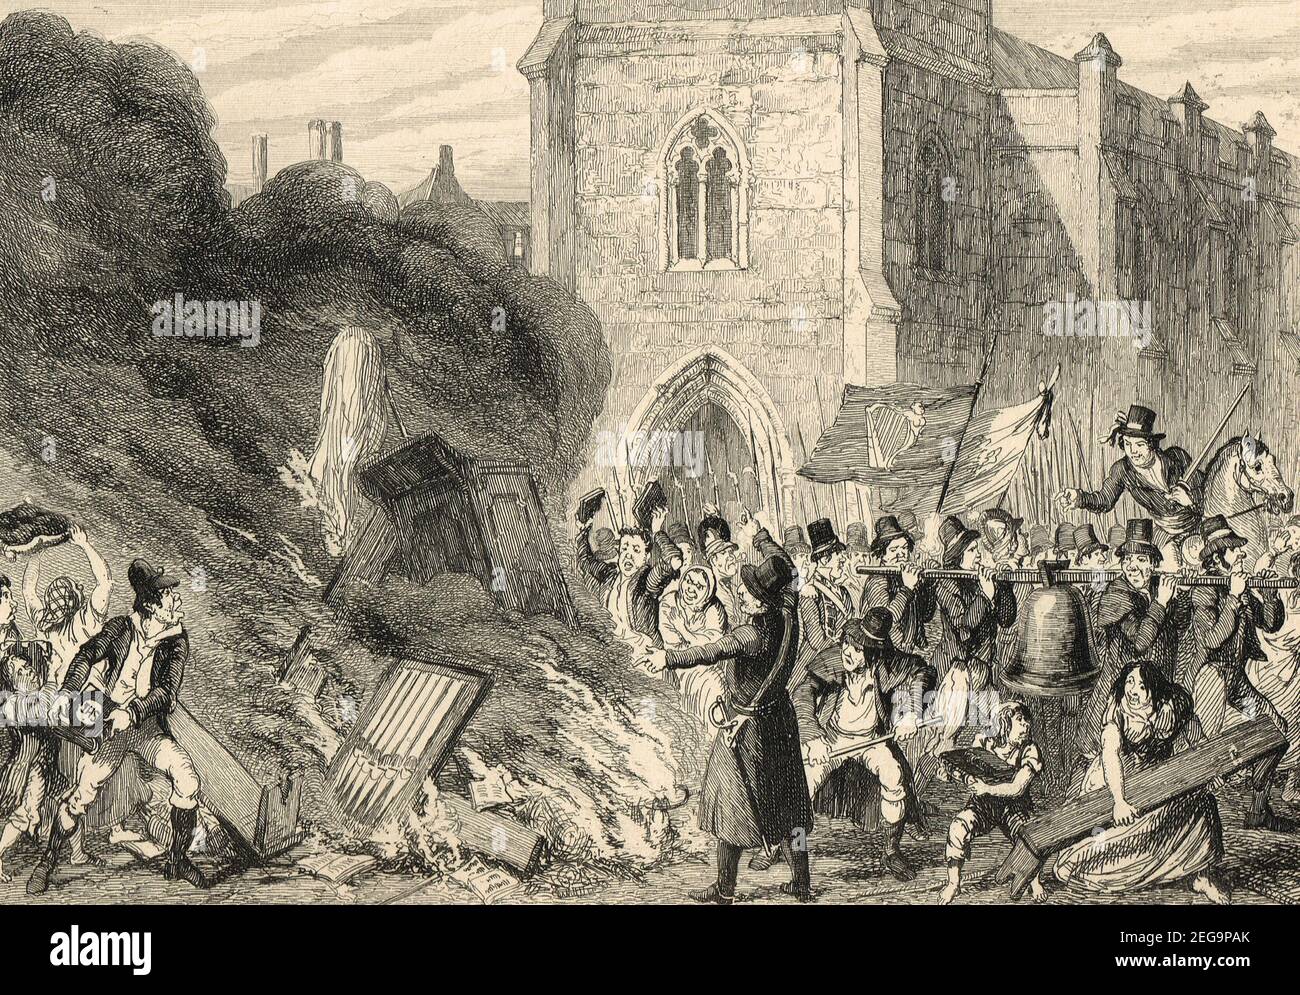 The destruction of the church at Enniscorthy, an alleged incident during the Irish Rebellion of 1798 Stock Photo